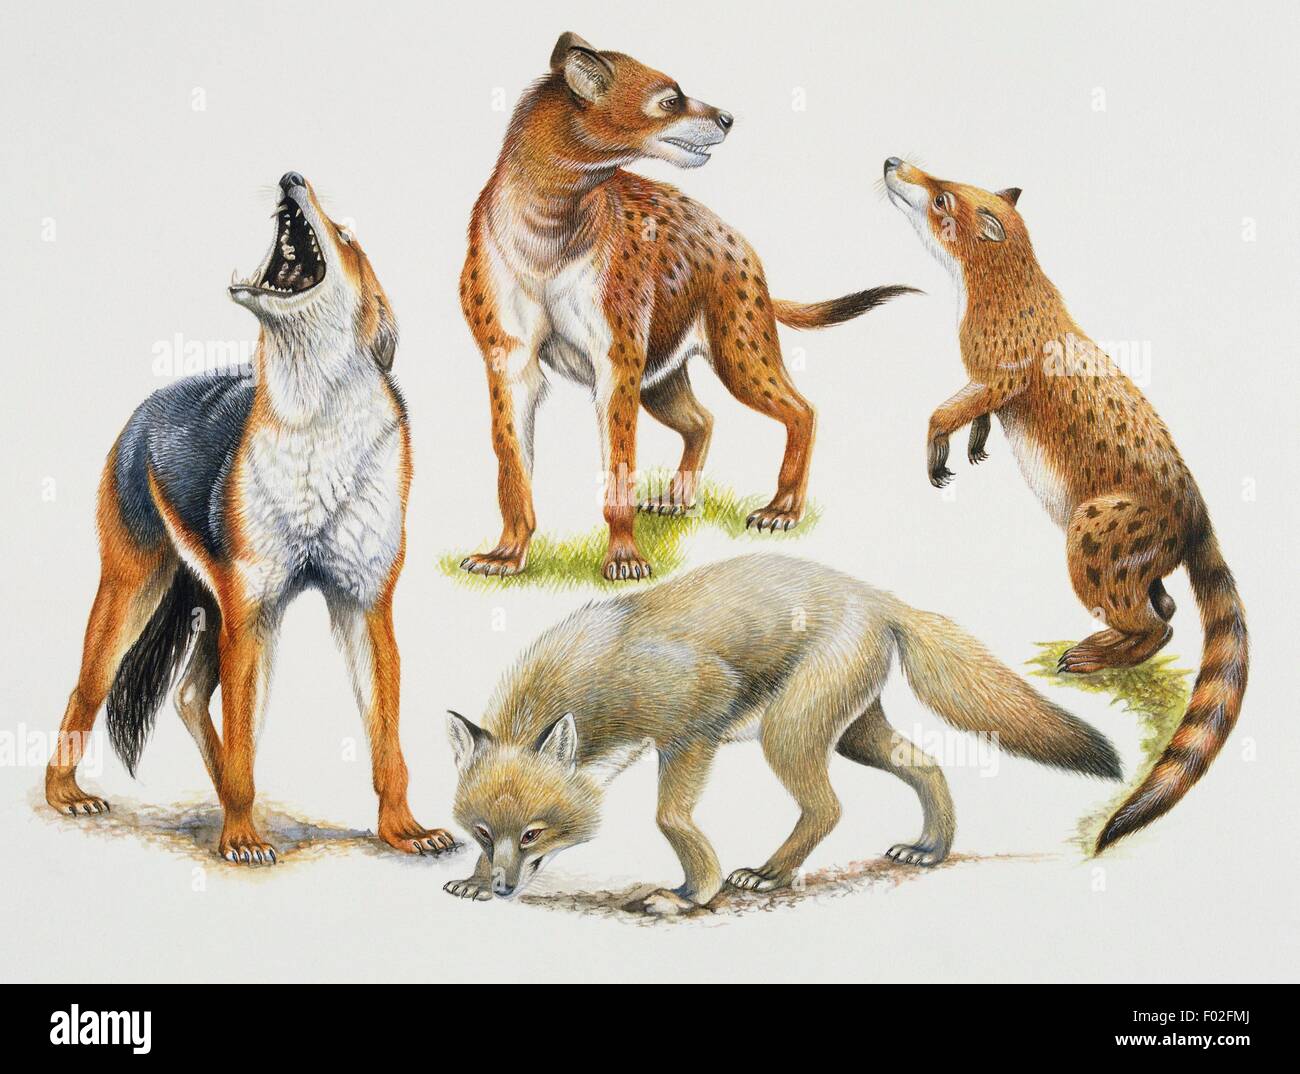 From top, clockwise, Osteoborus sp, Canidae, Hesperocyon sp, Canidae, forest fox (Cerdocyon thous), Canidae, Cynodesmus sp, Canidae. Artwork by Stephen Roberts. Stock Photo